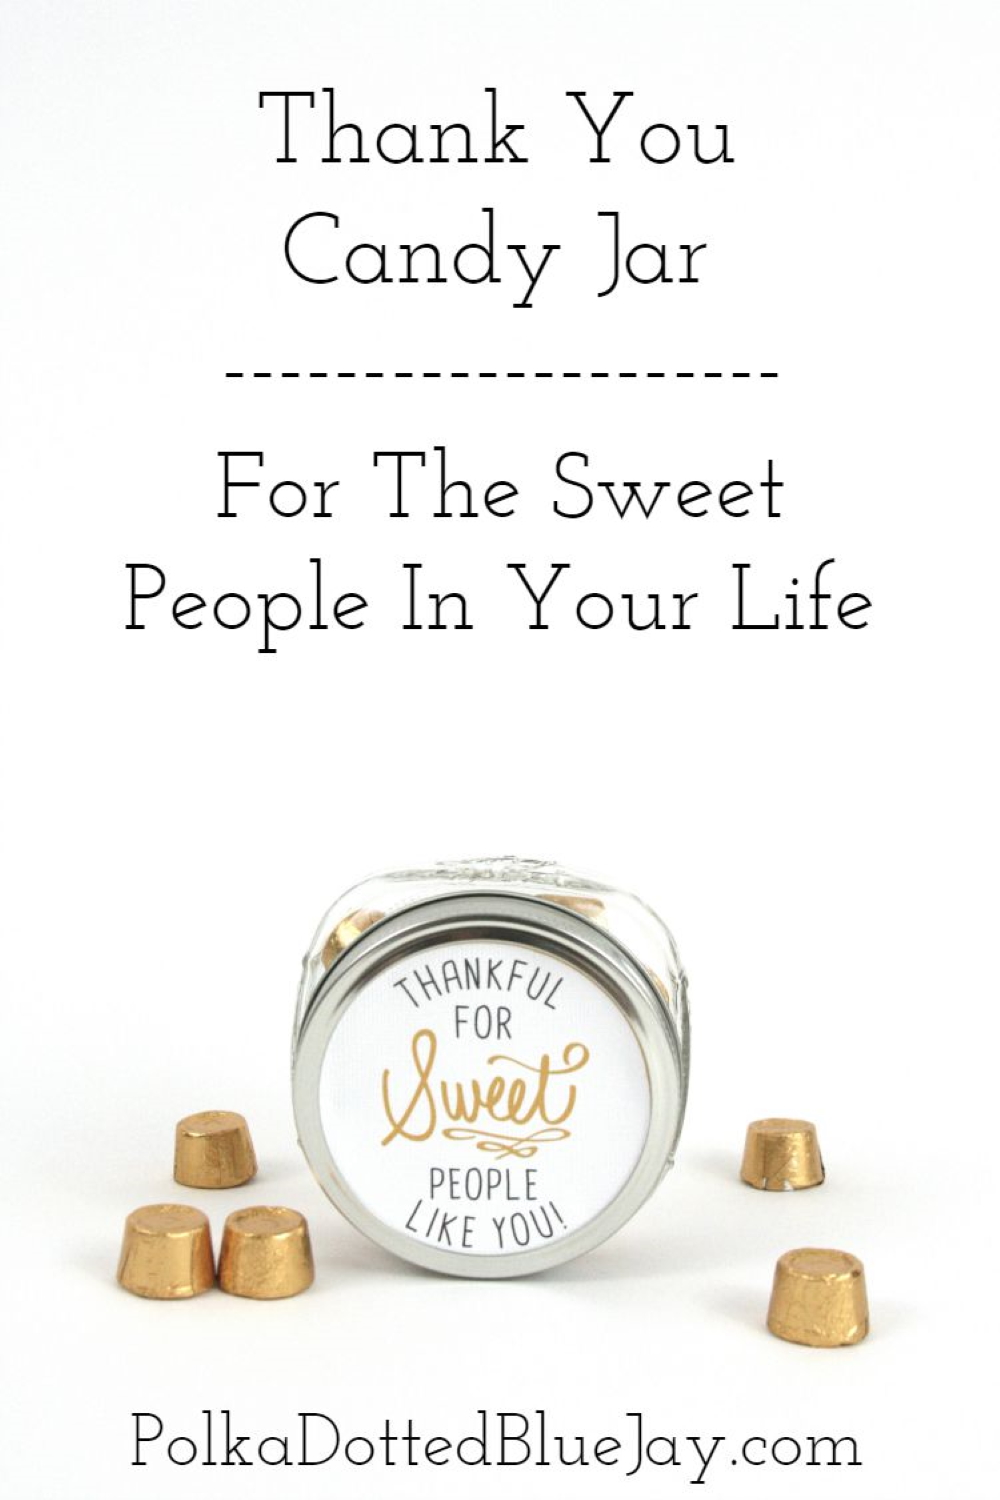 Make this DIY candy jar as a gift for your boss. Thankful for sweet people like you.